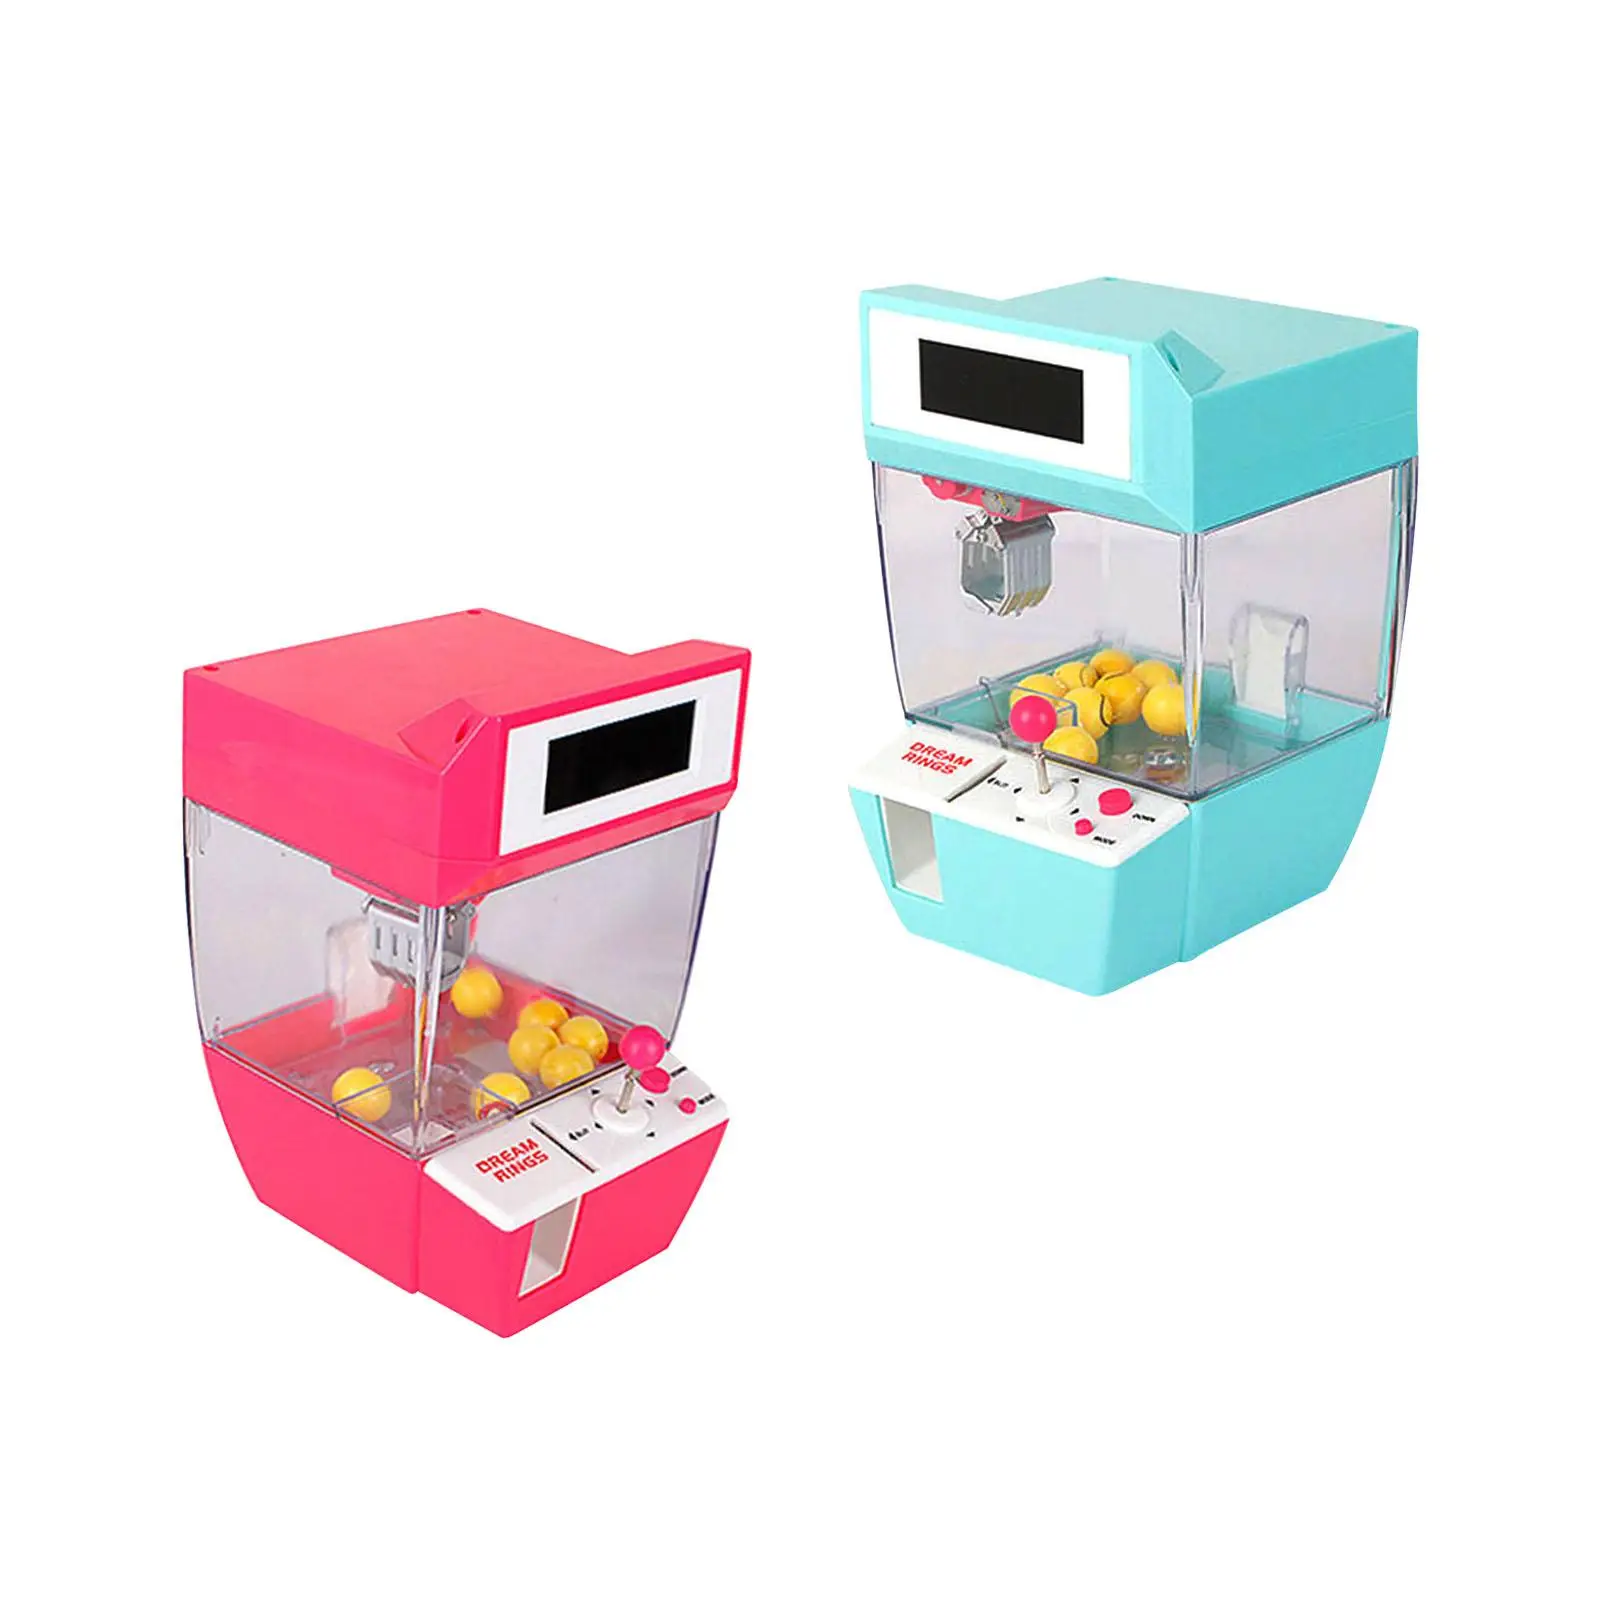 Mini Arcade Claw Machine for Kids Birthday Gift Alarm Clock and Games Modes Play Game Lightweight for Small Toys Small Reusable